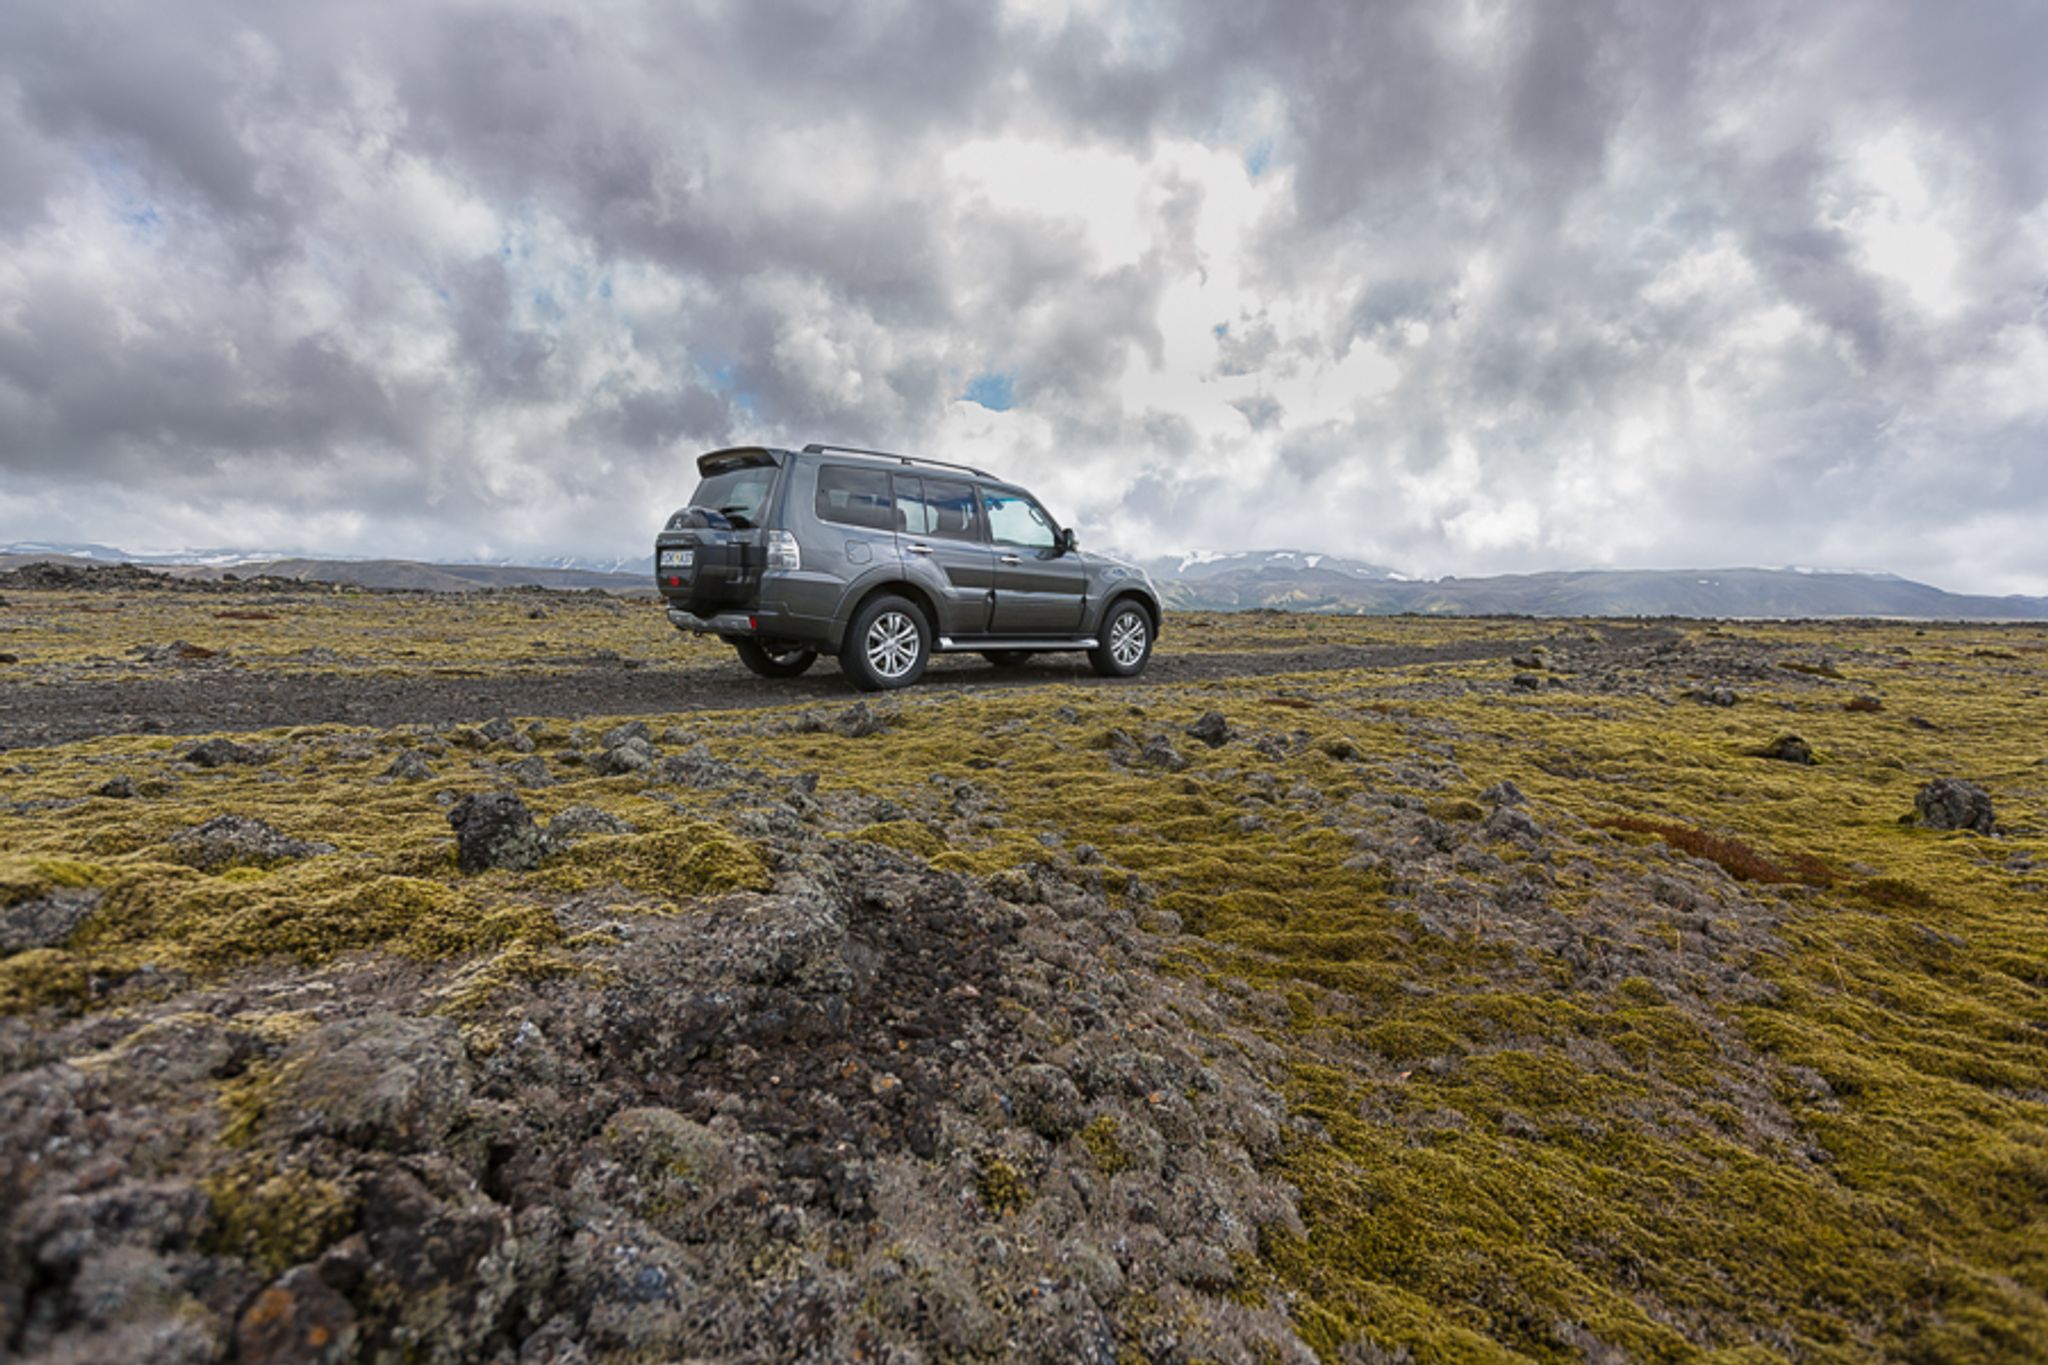 The 4x4 Mitsubishi Pajero driving on a gravel road in iceland